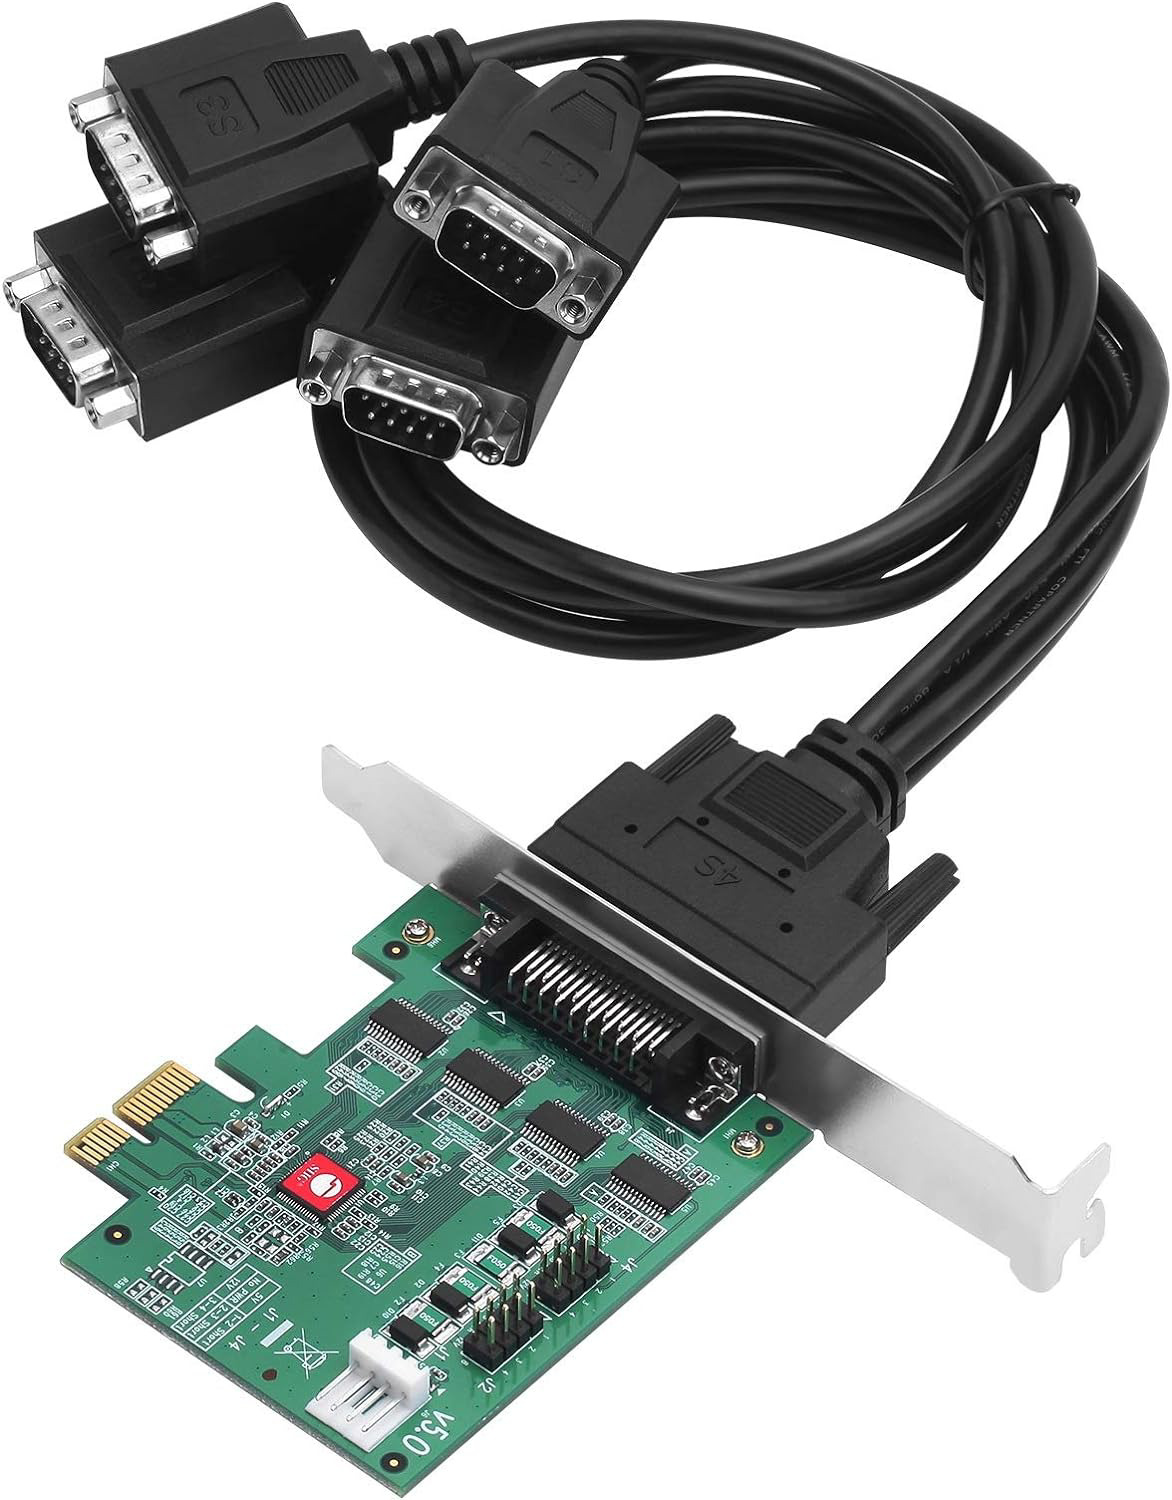 SIIG DP CyberSerial 4S PCIe, 16550 UART, Baud Rates up to 921Kbps, PCIe 2.0 x1 t